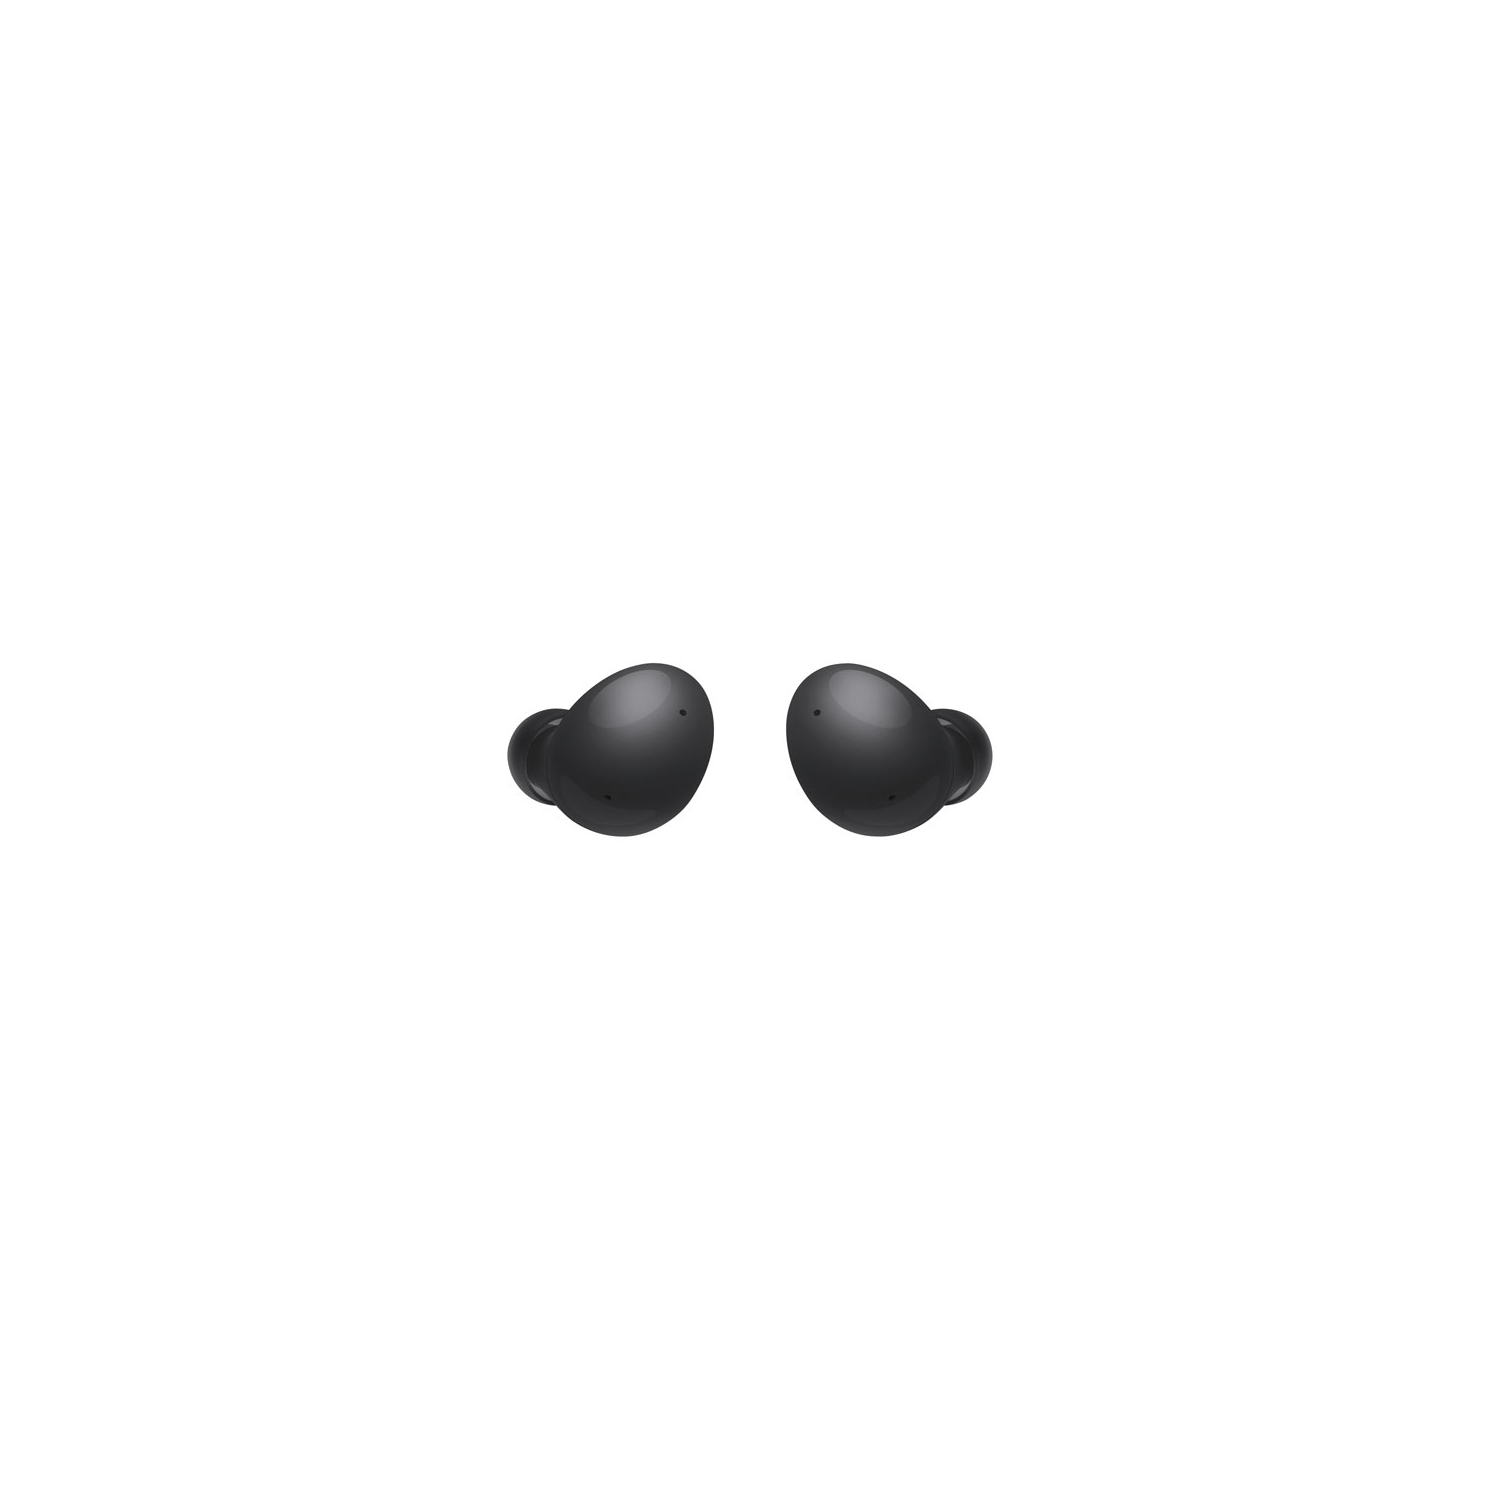 Samsung Galaxy Buds2 In-Ear Noise Cancelling Truly Wireless Headphones - Black - Open Box